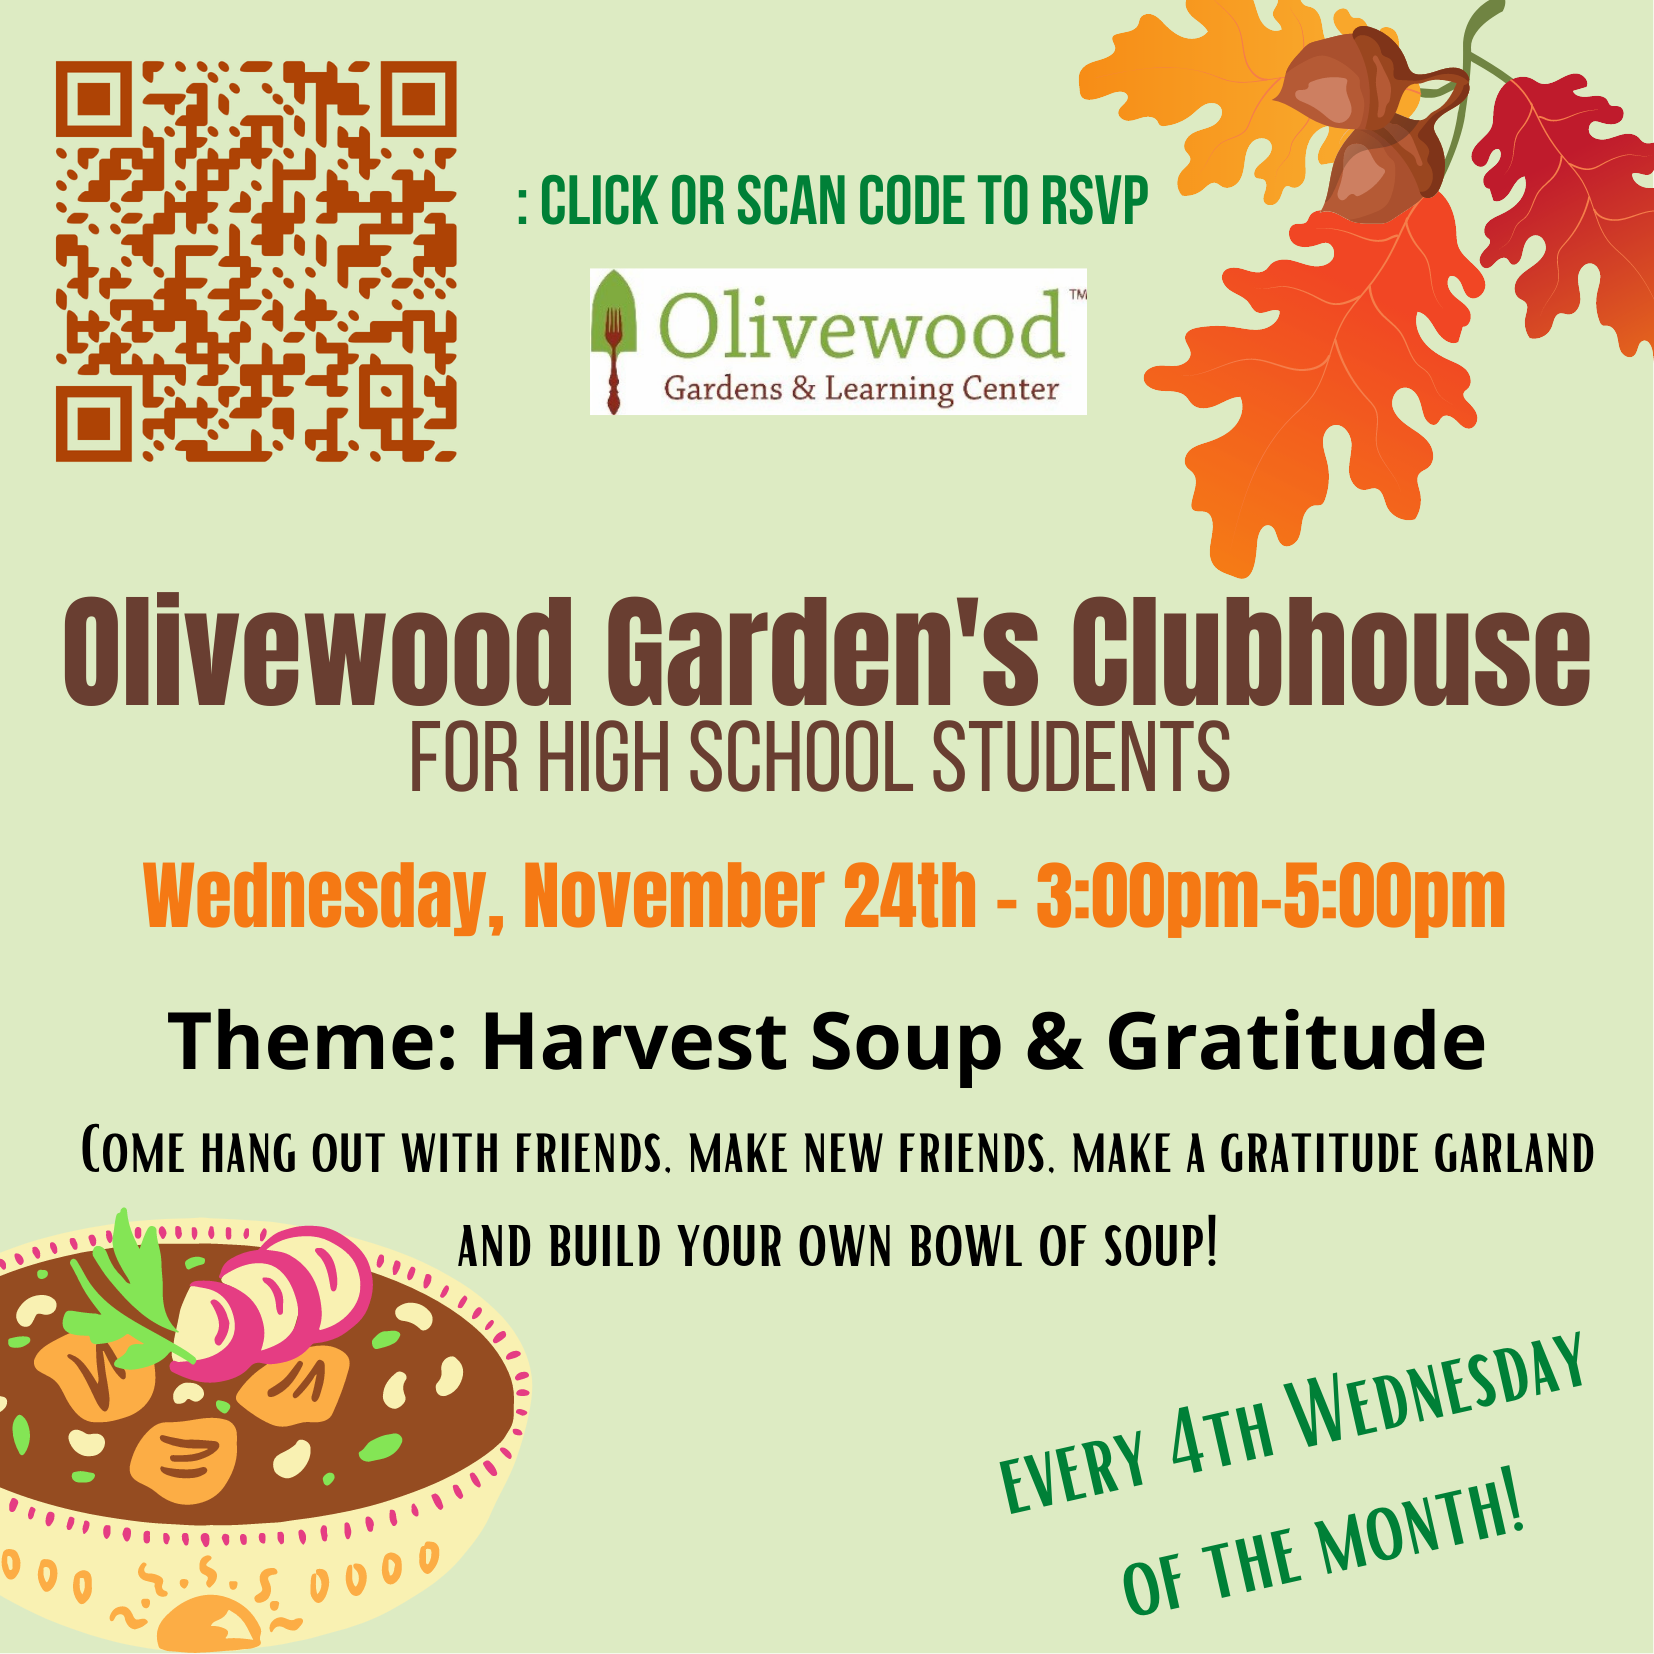 Olivewood Gardens High School Clubhouse!